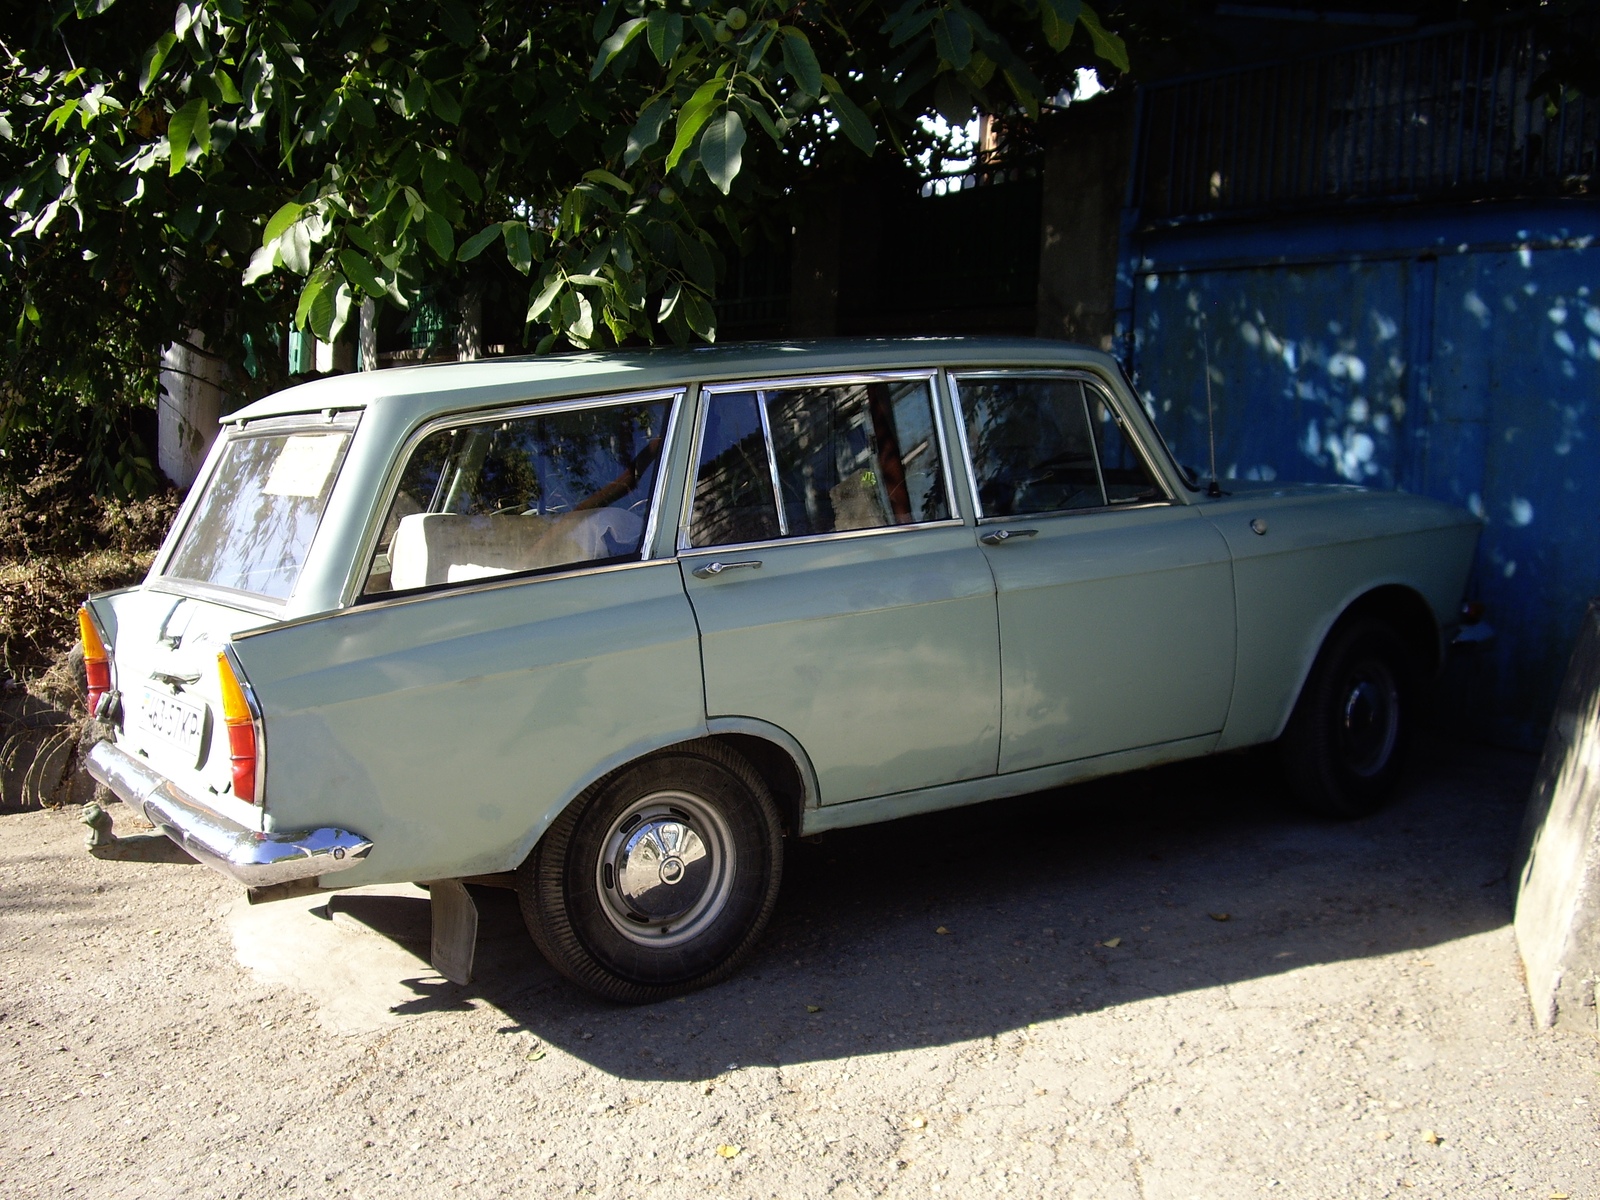 Moskvitch 403IE Photo Gallery: Photo #10 out of 12, Image Size ...